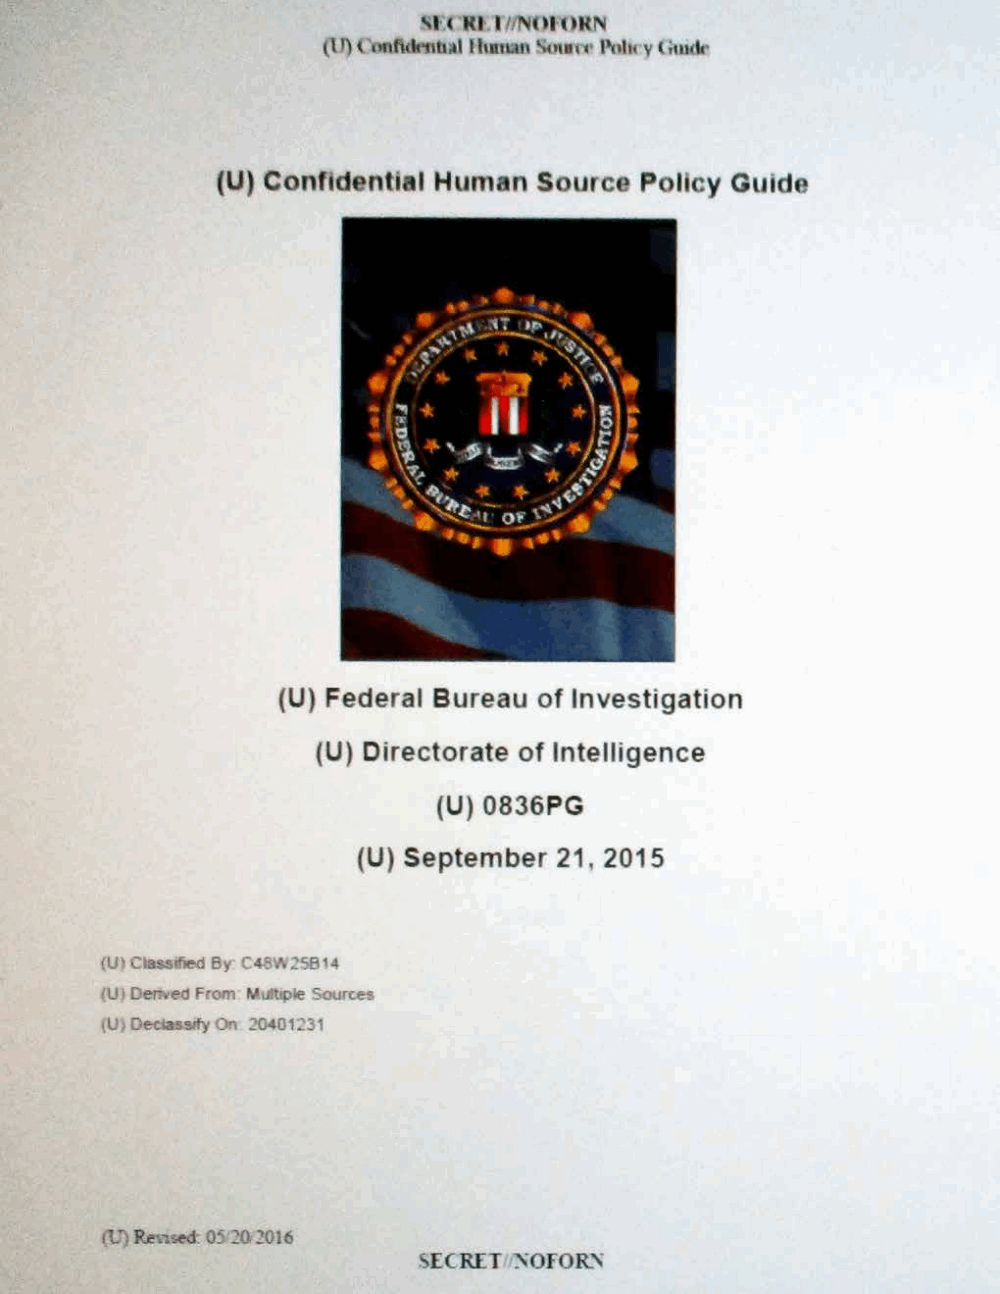 Page 1 from Confidential Human Source Policy Guide